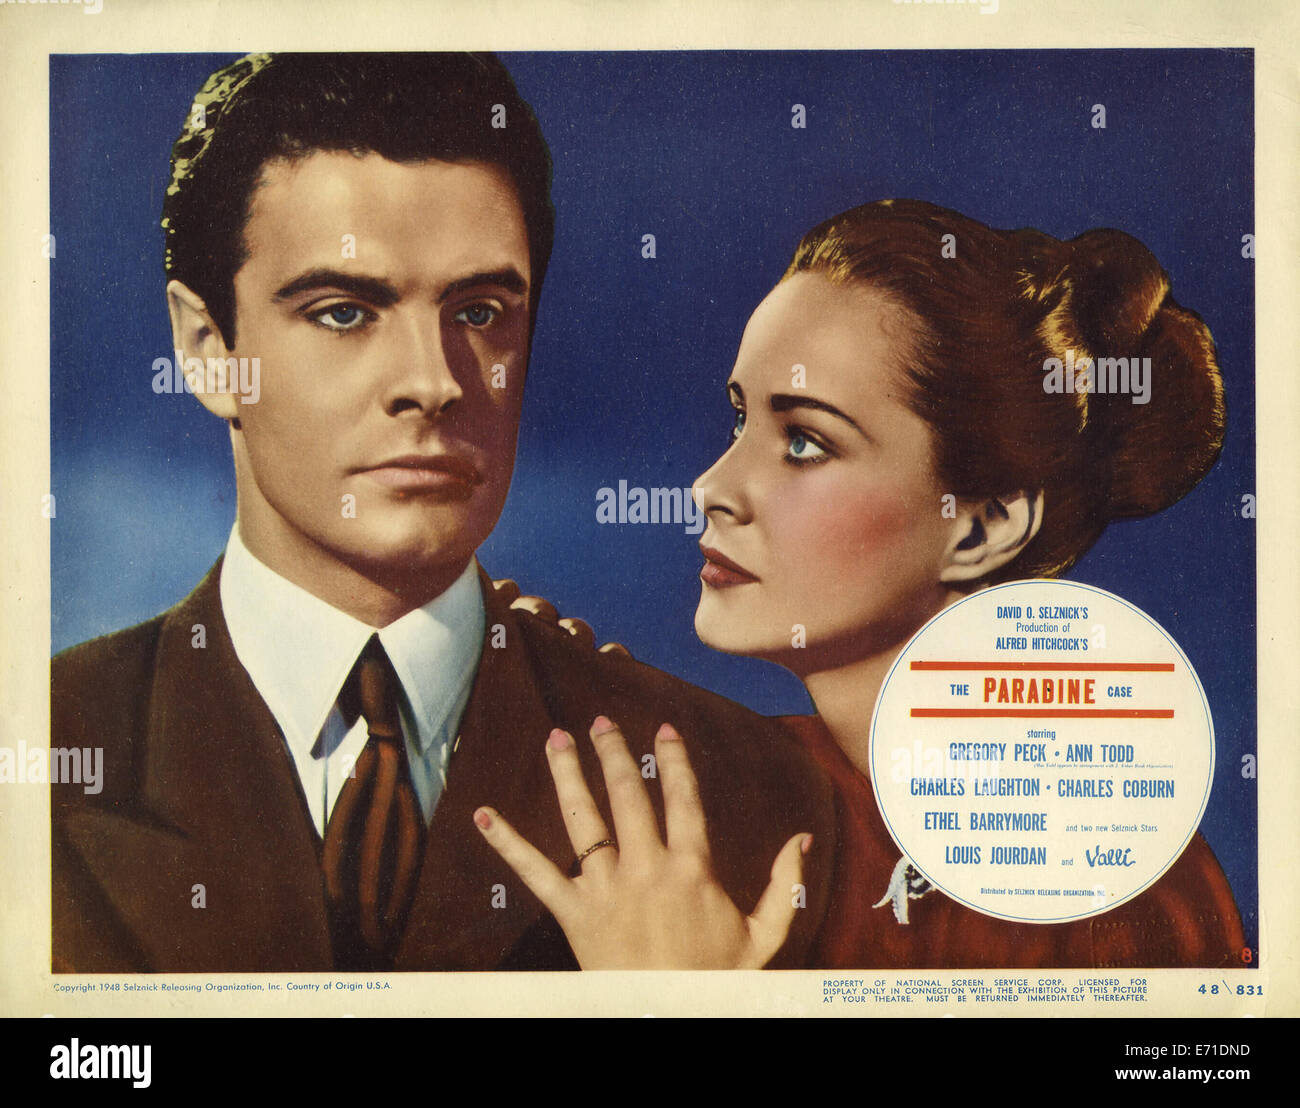 The Paradine case - Lobby Card - Director : Alfred Hitchcock - 1947 ...